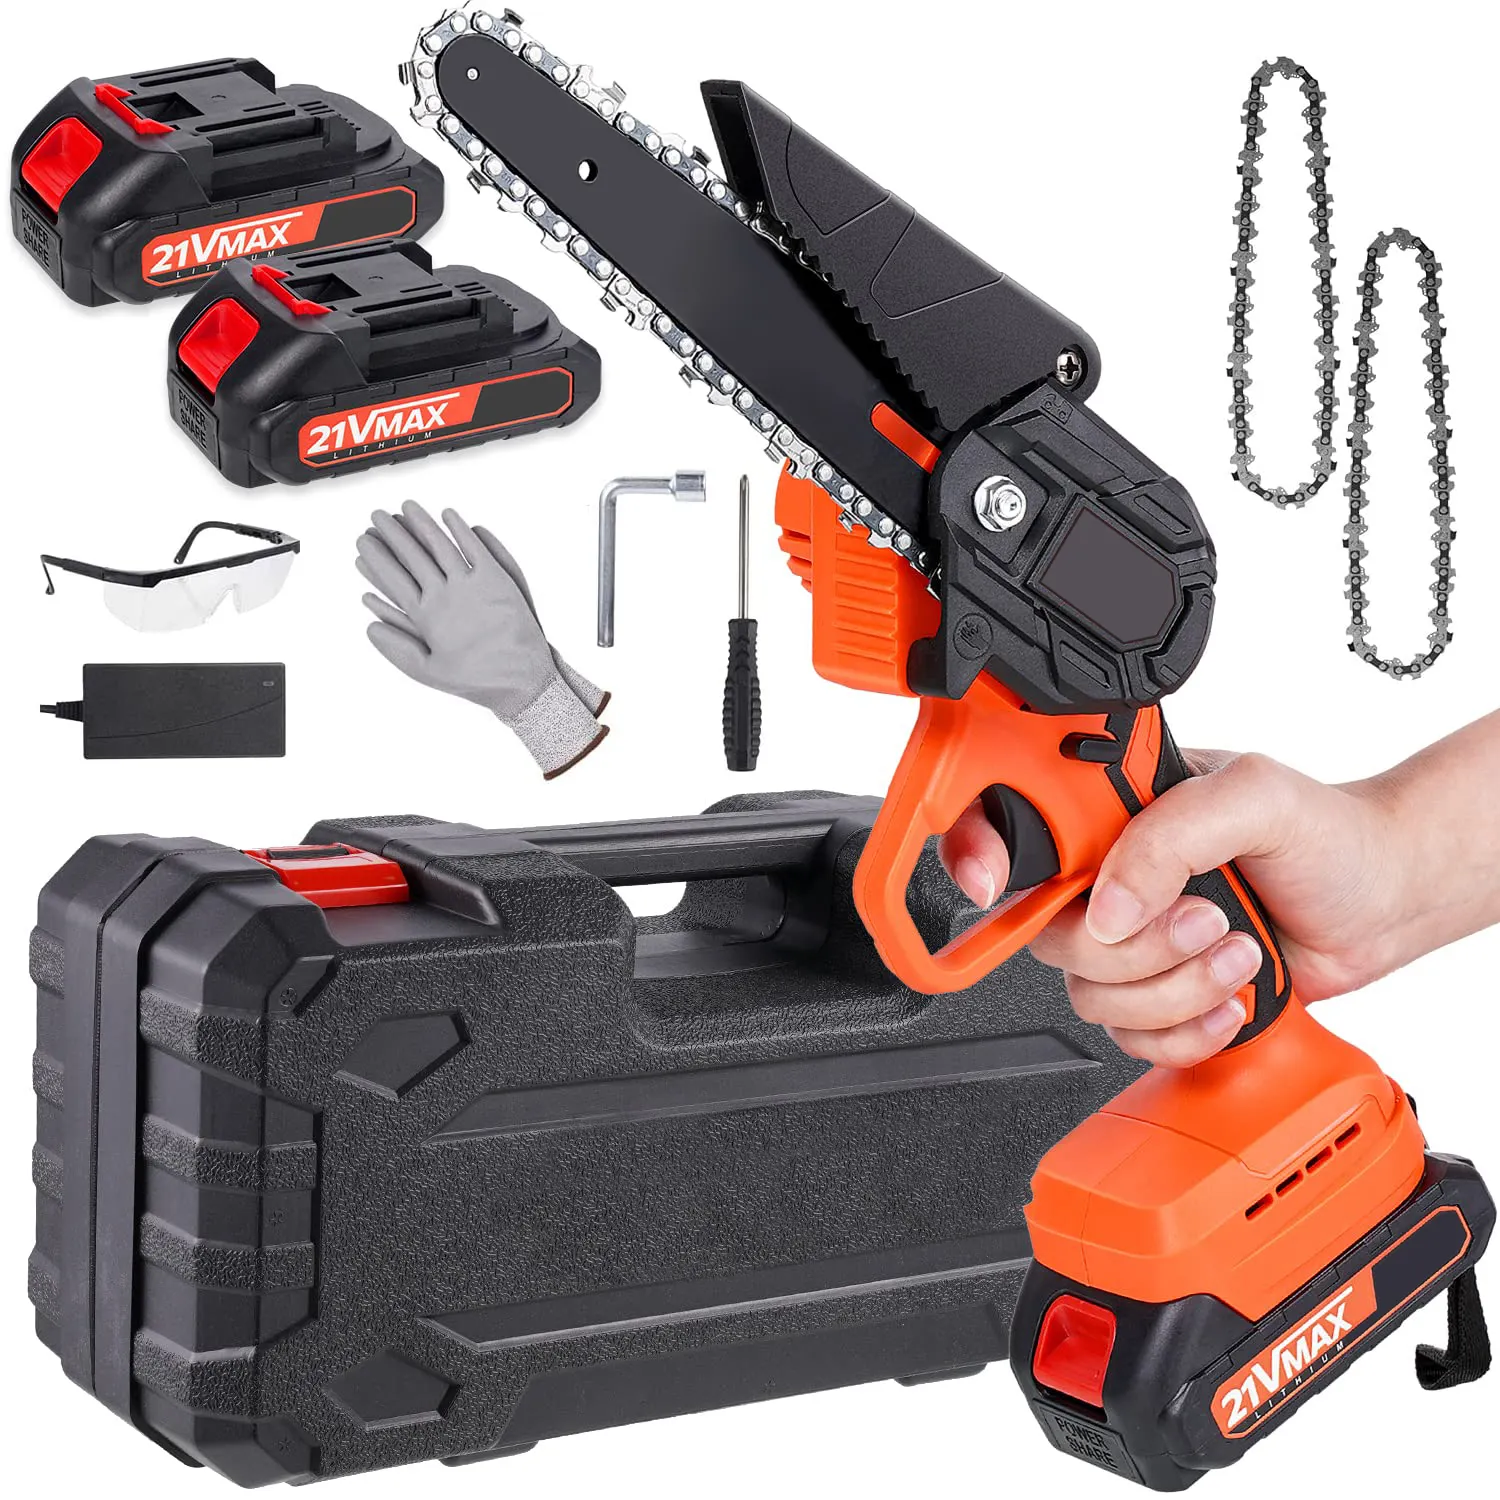 CS03 Hot sale OEM 4/6 inch Battery lithium Chainsaw Portable Cordless Mini electric chainsaw